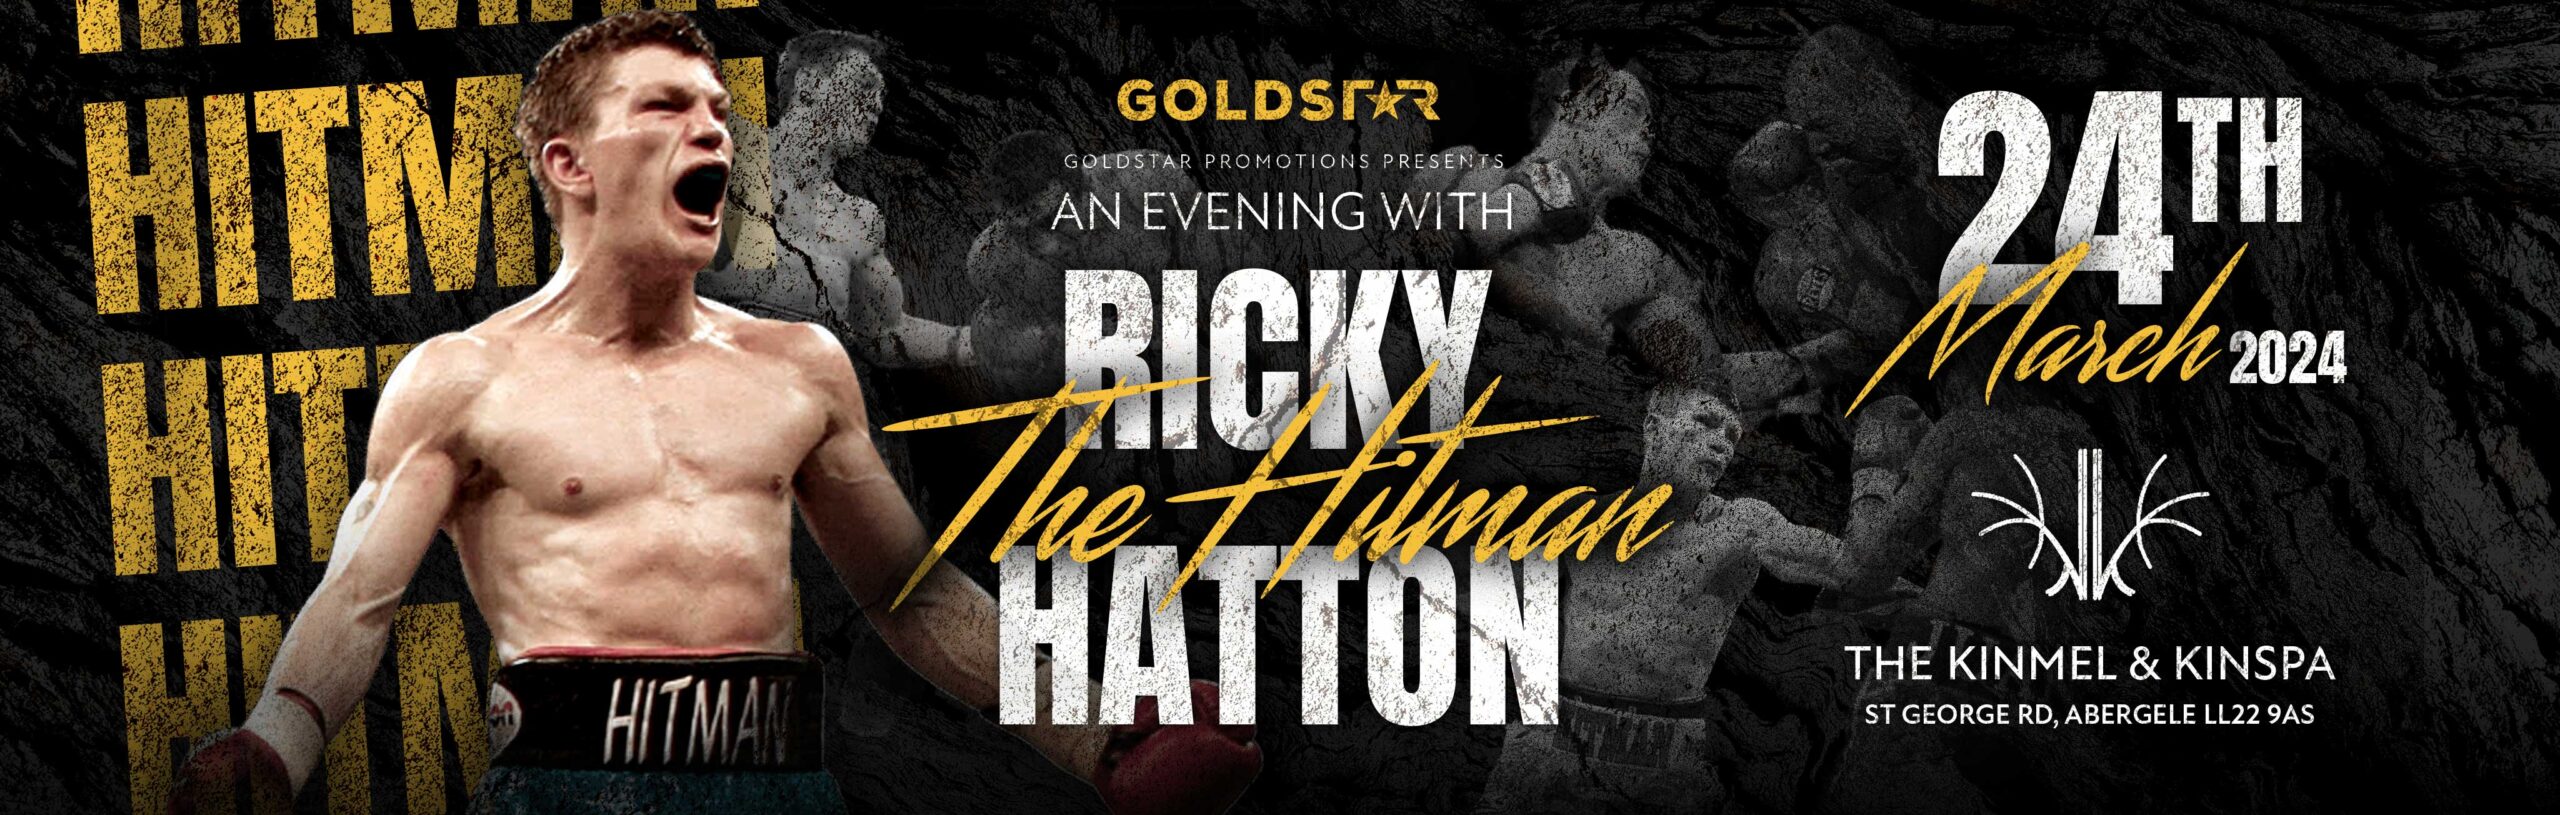 Ricky Hatton 23rd March 2024